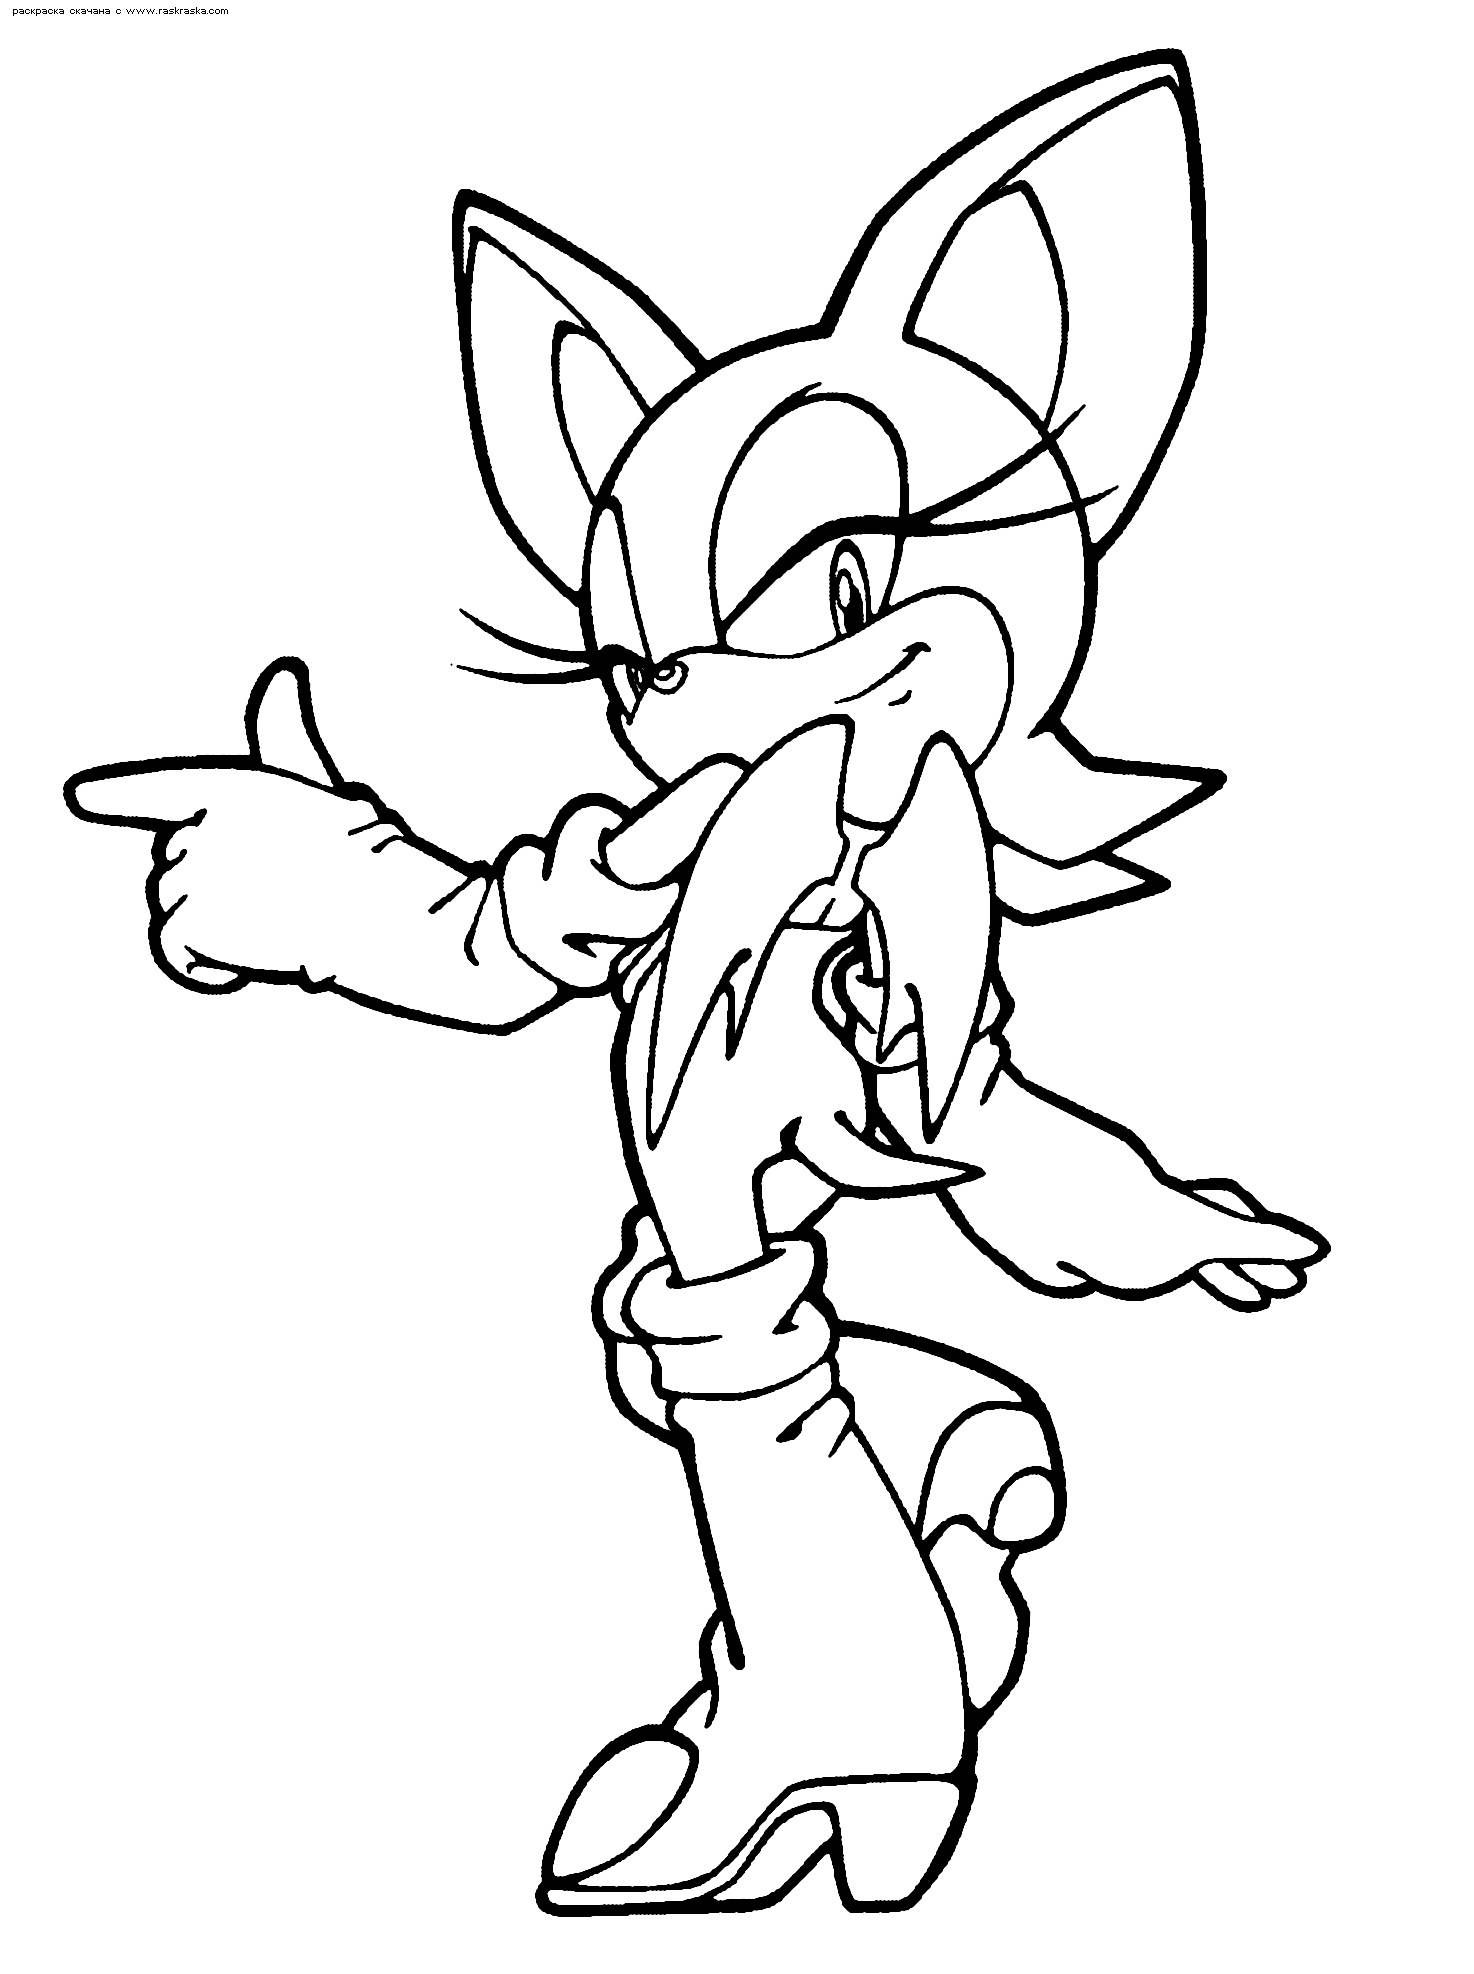 Sonic coloring pages | disney coloring pages for kids | color pages | coloring pages to print | kids coloring pages | #65